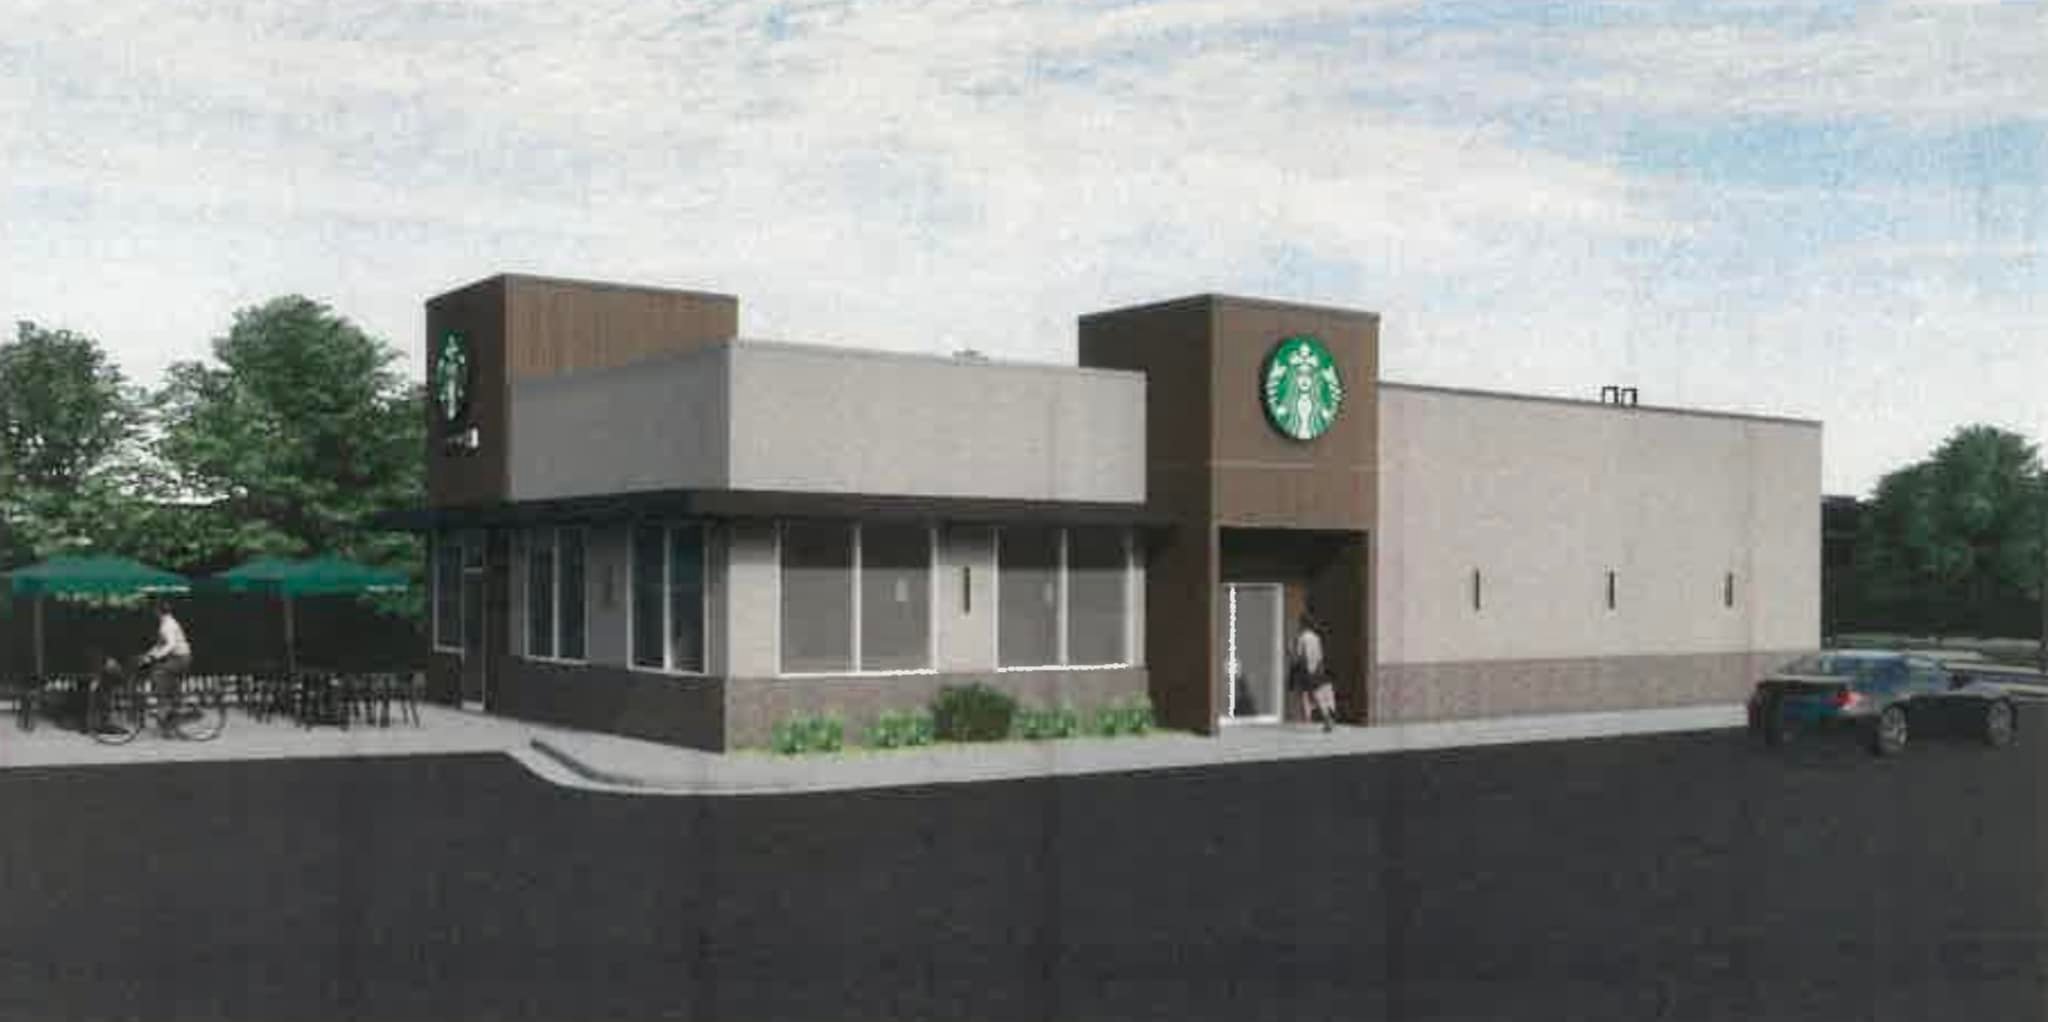 Starbucks plans move, expansion in Trussville